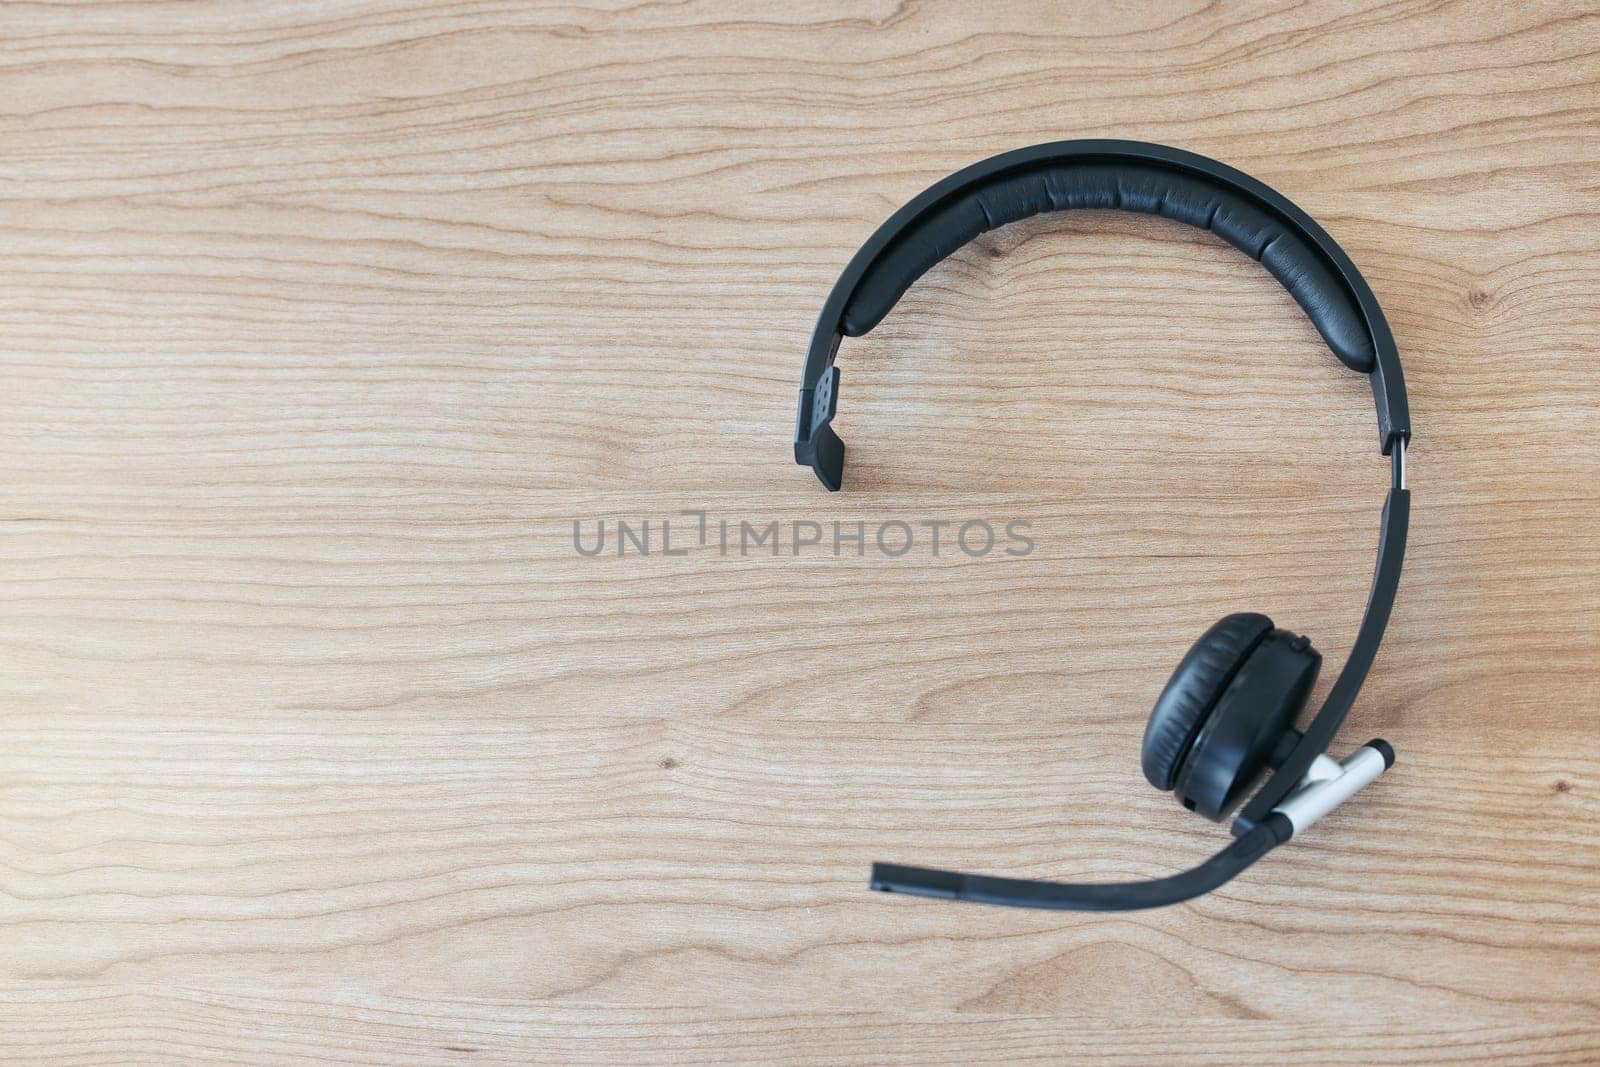 Wood background, headset and contact in call center for help desk, customer service or telemarketing. Tech support, table and headphones for communication, crm or tools for online consulting business.